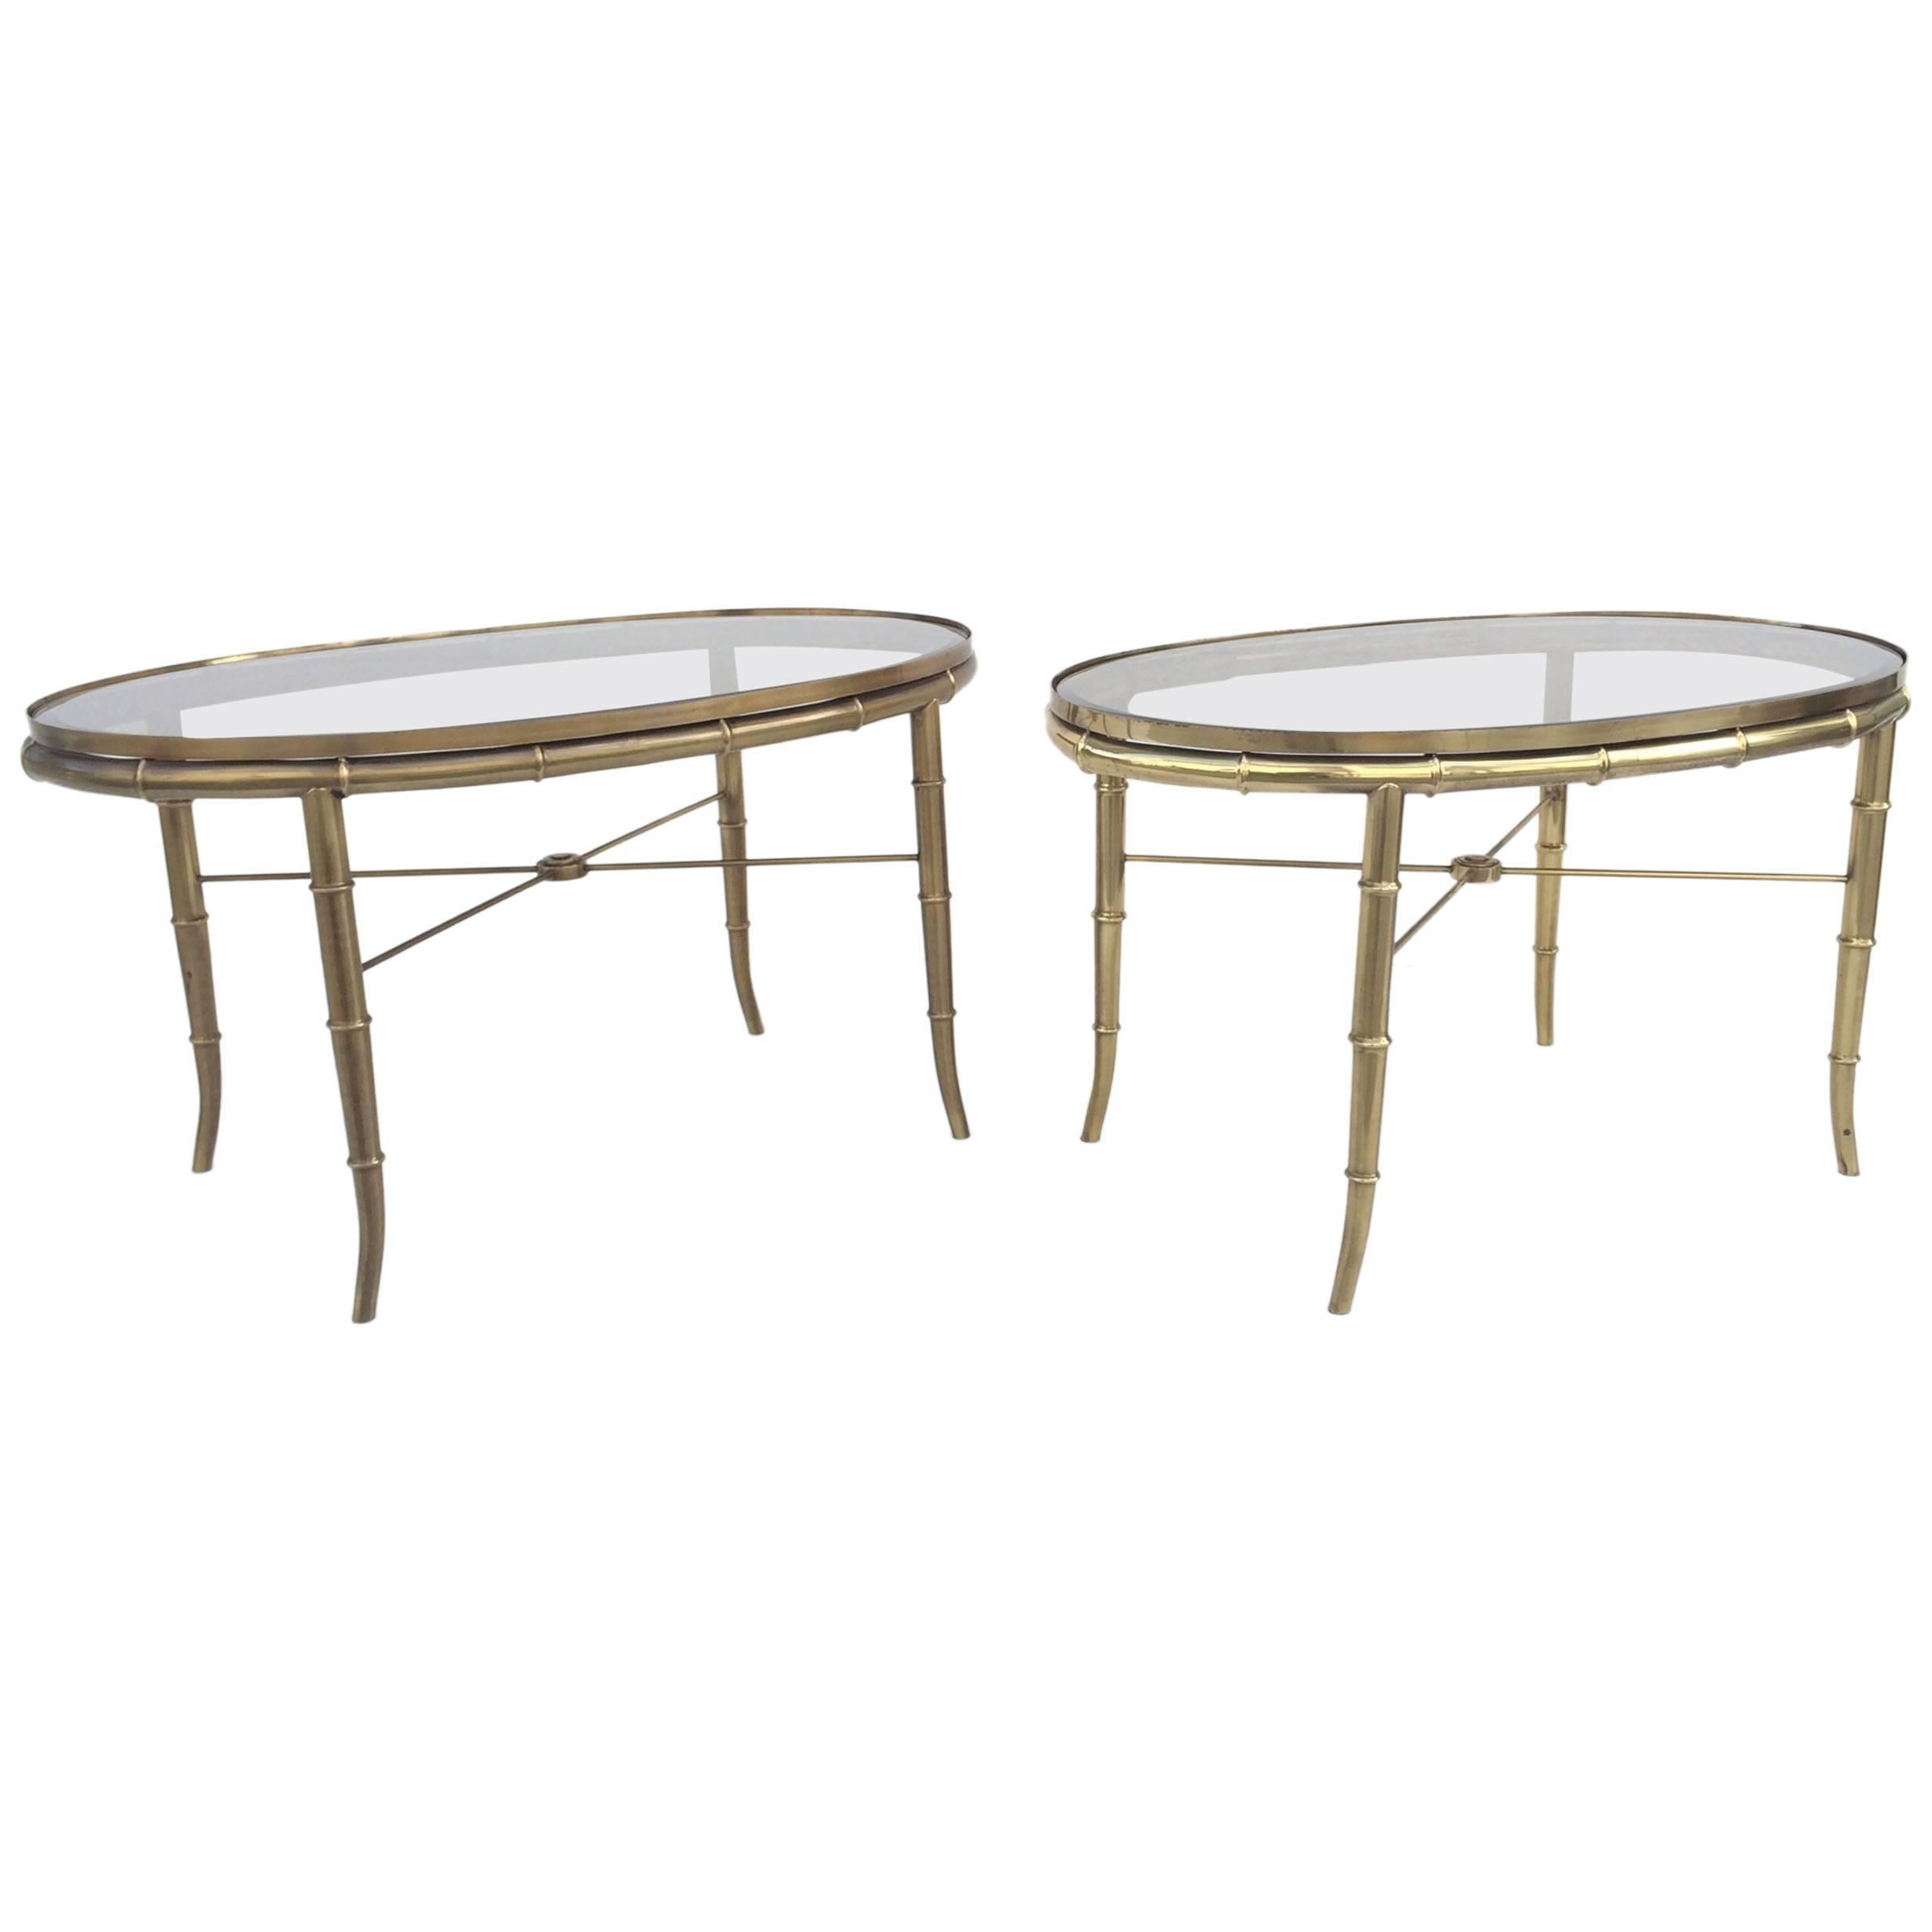 Pair of Aged Brass Faux Bamboo Occasional Tables by Mastercraft. 